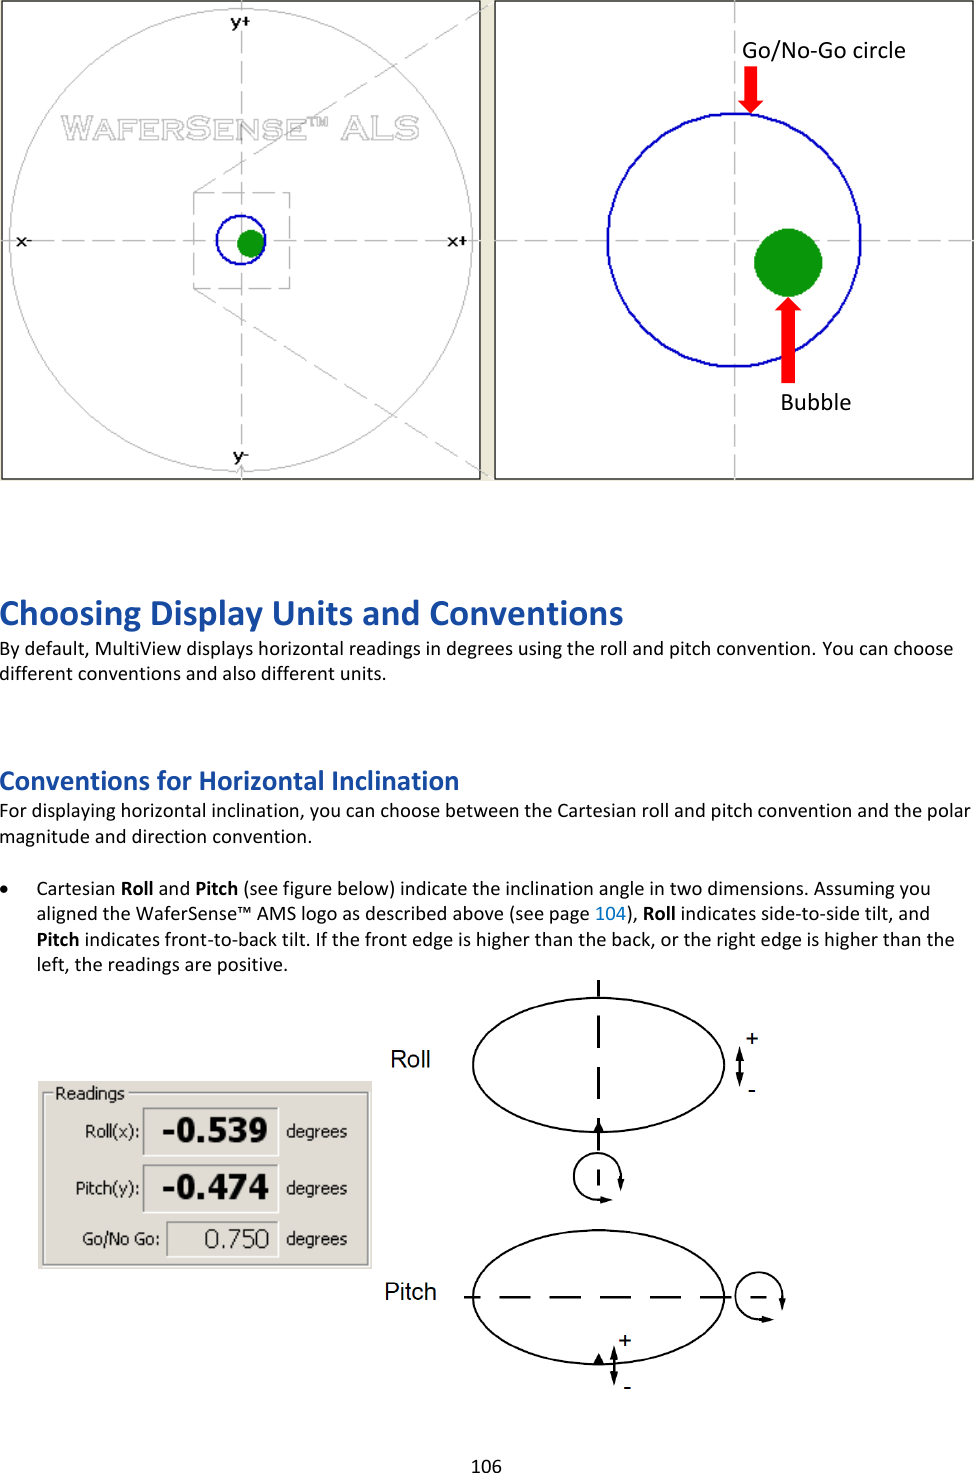   106                         Choosing Display Units and Conventions By default, MultiView displays horizontal readings in degrees using the roll and pitch convention. You can choose different conventions and also different units.    Conventions for Horizontal Inclination For displaying horizontal inclination, you can choose between the Cartesian roll and pitch convention and the polar magnitude and direction convention.  • Cartesian Roll and Pitch (see figure below) indicate the inclination angle in two dimensions. Assuming you aligned the WaferSense™ AMS logo as described above (see page 104), Roll indicates side-to-side tilt, and Pitch indicates front-to-back tilt. If the front edge is higher than the back, or the right edge is higher than the left, the readings are positive.                  Bubble Go/No-Go circle 